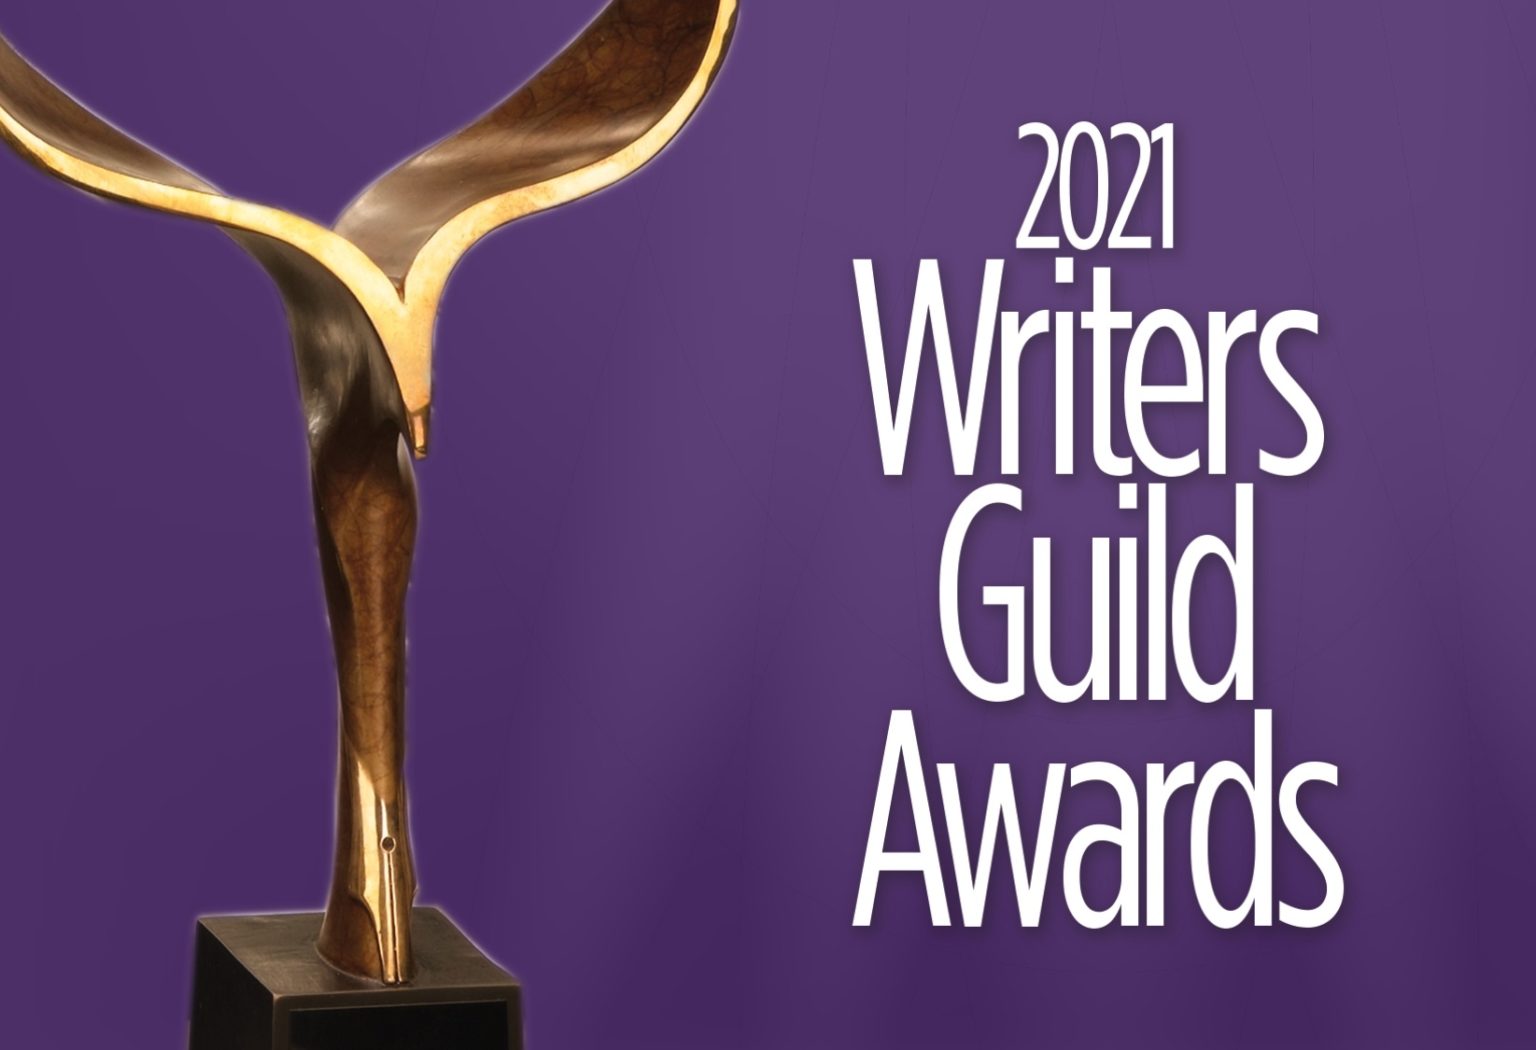 2021 Writers Guild Awards Winners Announced Press Room